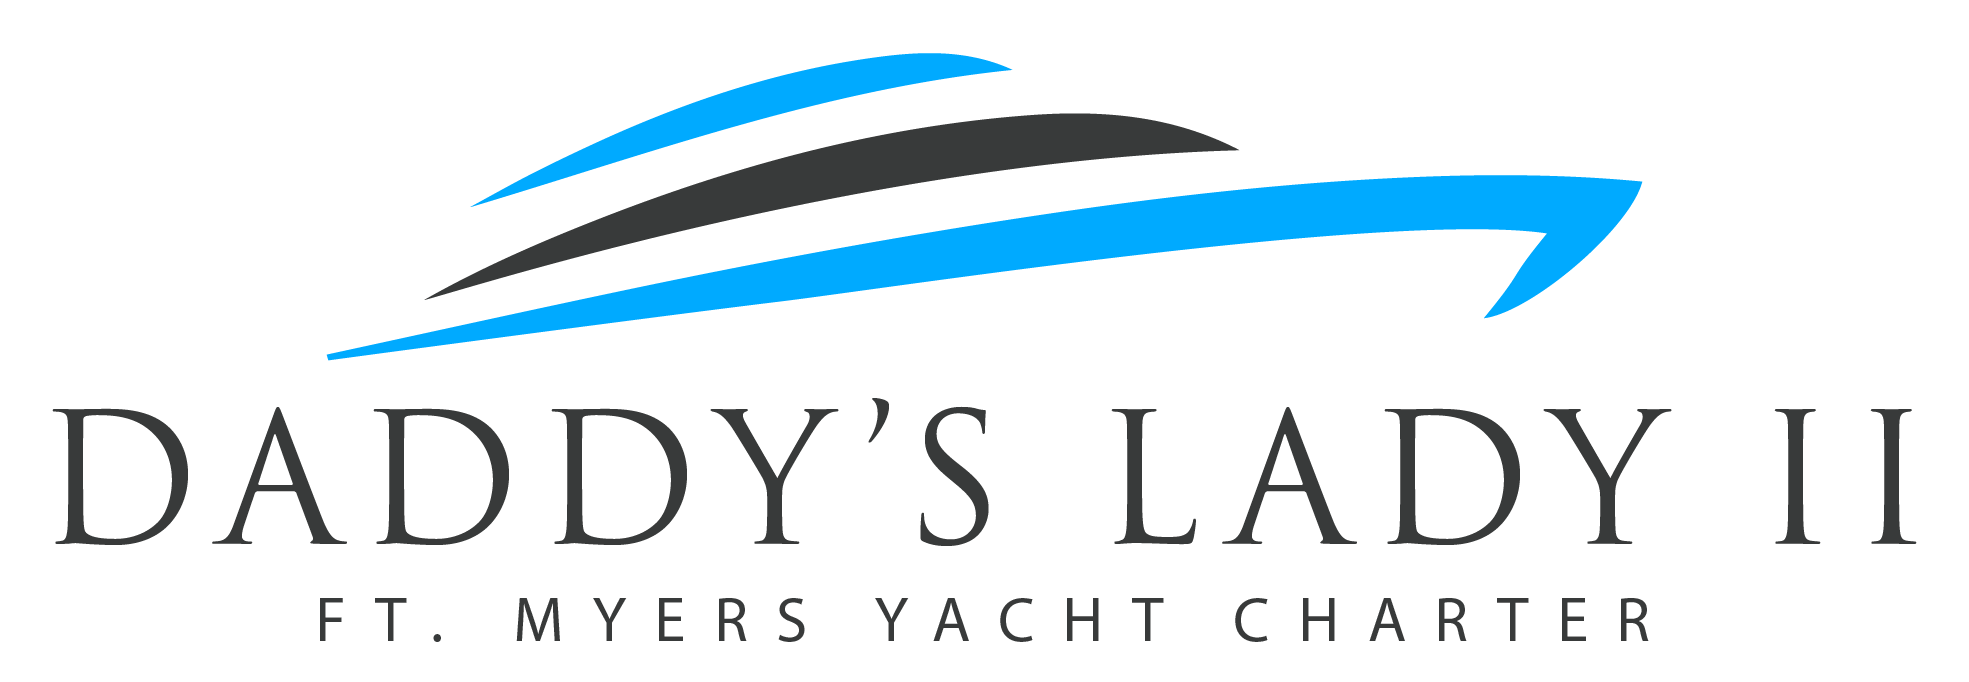 Daddy's Lady | 84ft Luxury Charter Yacht | Ft. Myers, Florida